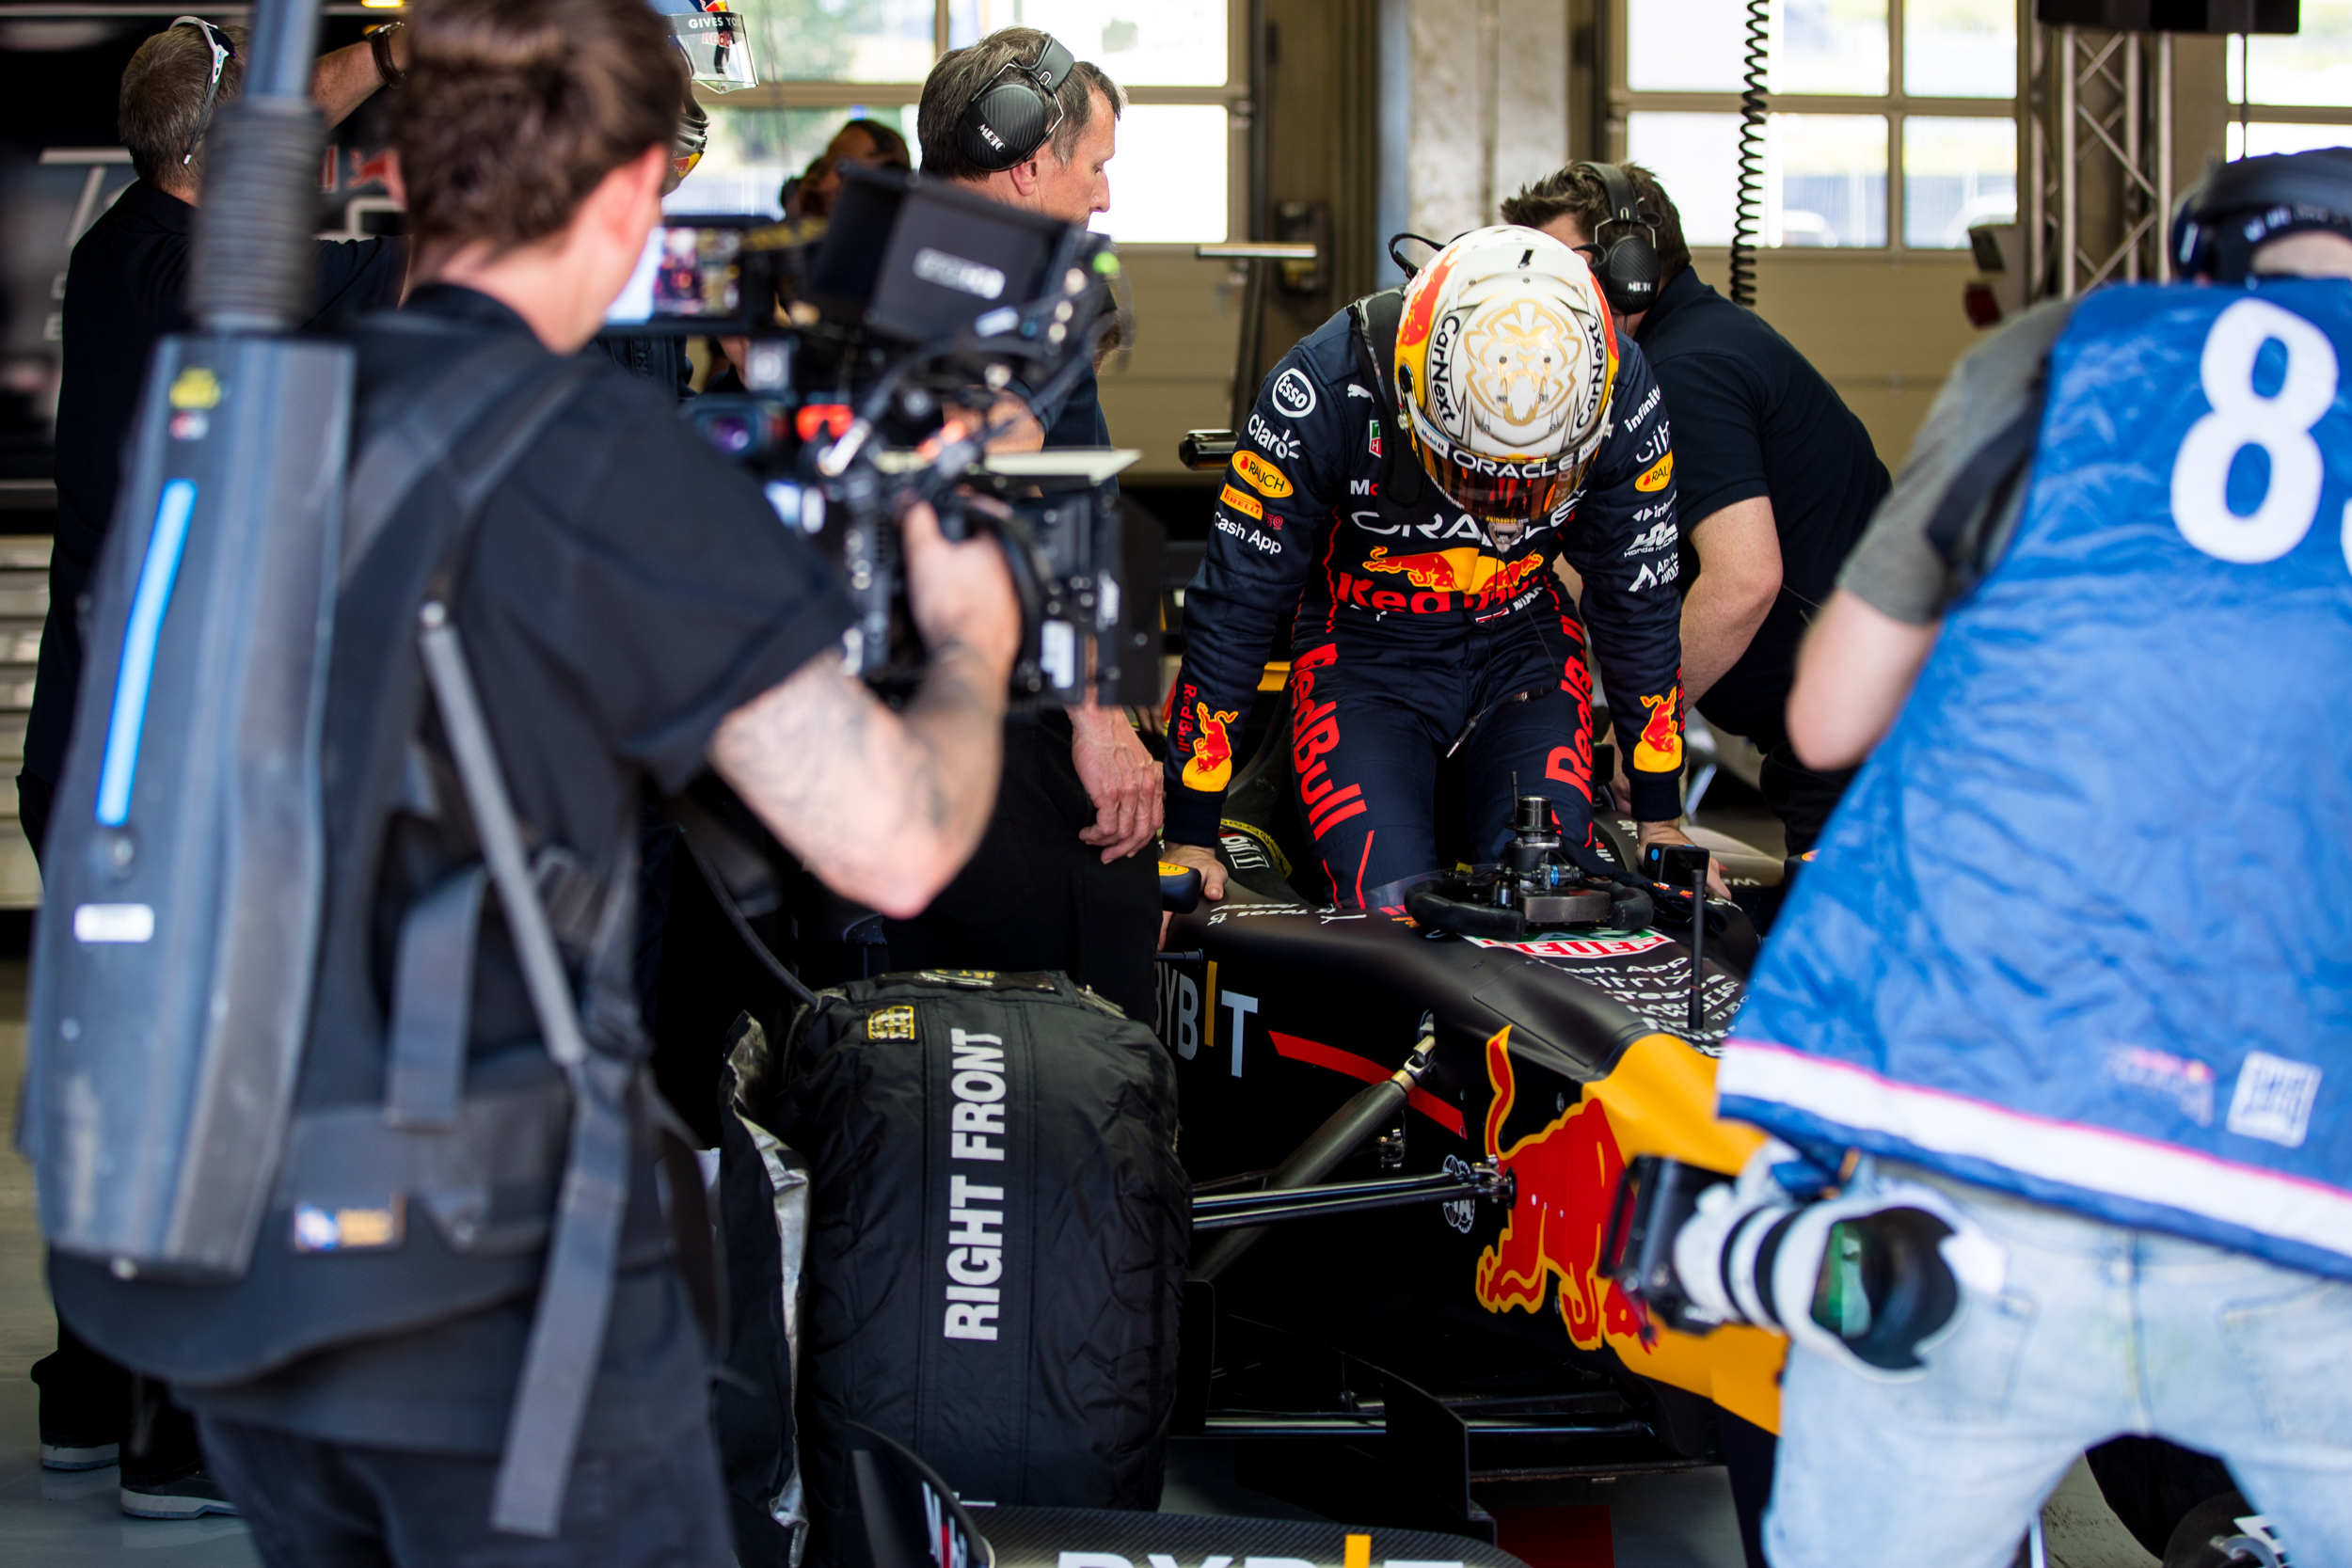 Max entering the car - Max Verstappen & Fabio Wibmer - Formula One - Seater Project - Red Bull Ring 2022